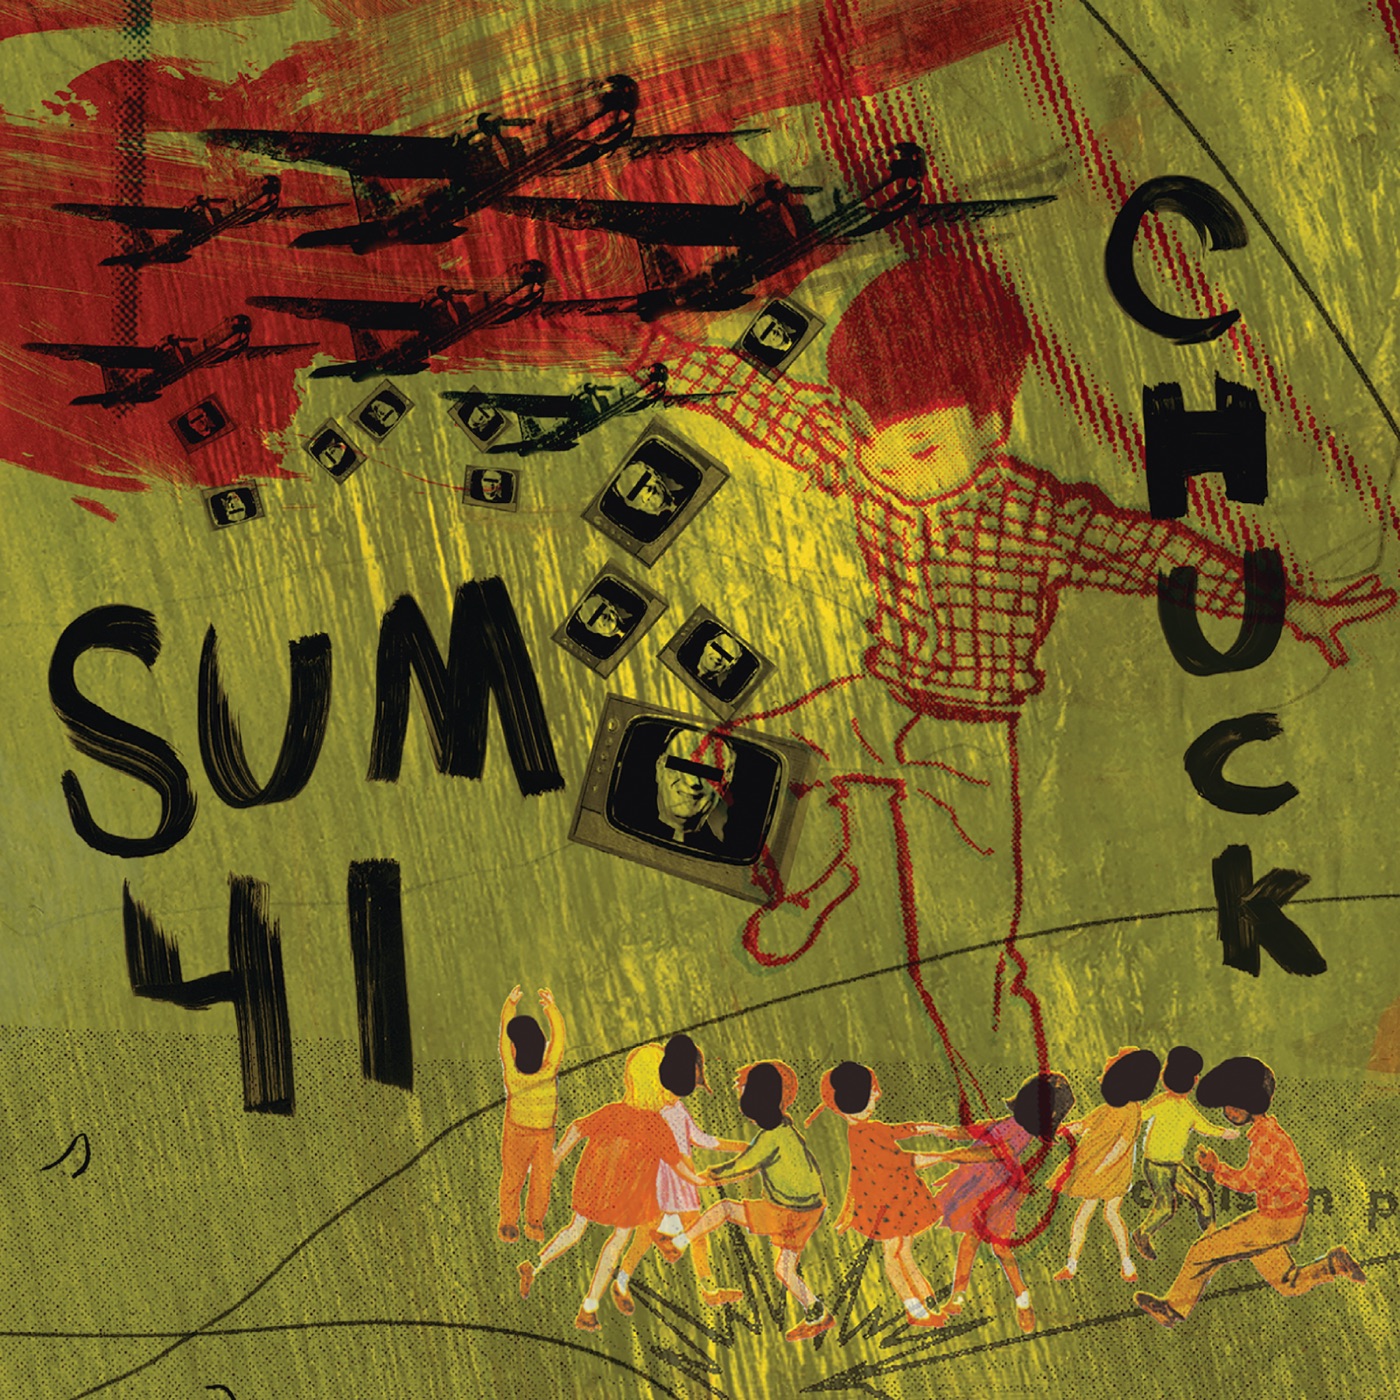 Chuck by Sum 41